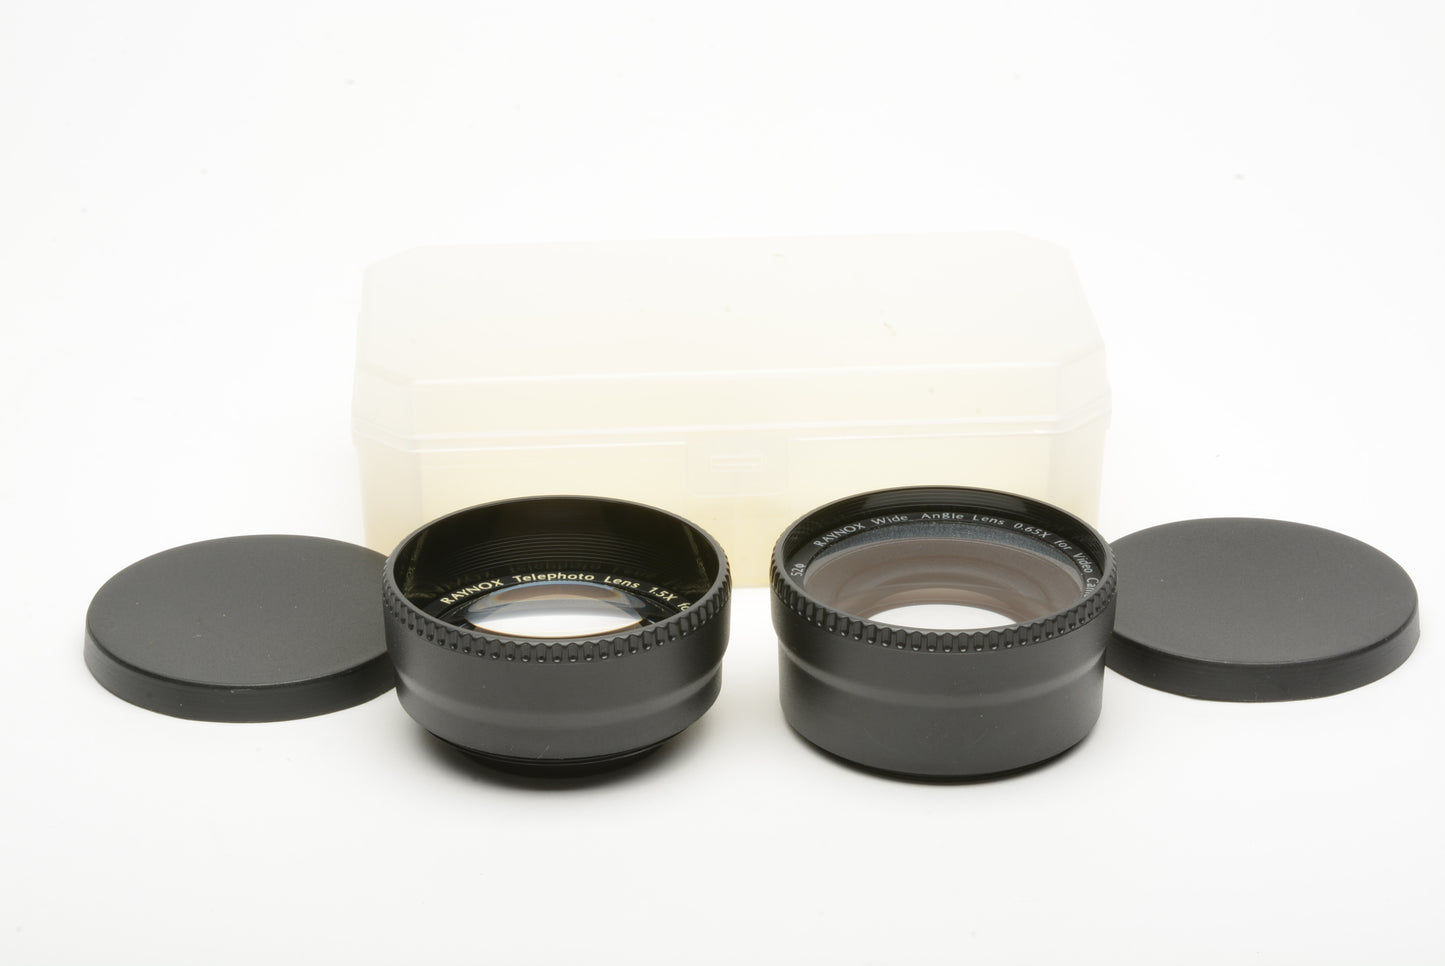 Raynox 2X 52mm Auxiliary lens set .65X wide & 1.5X telephoto, case+caps